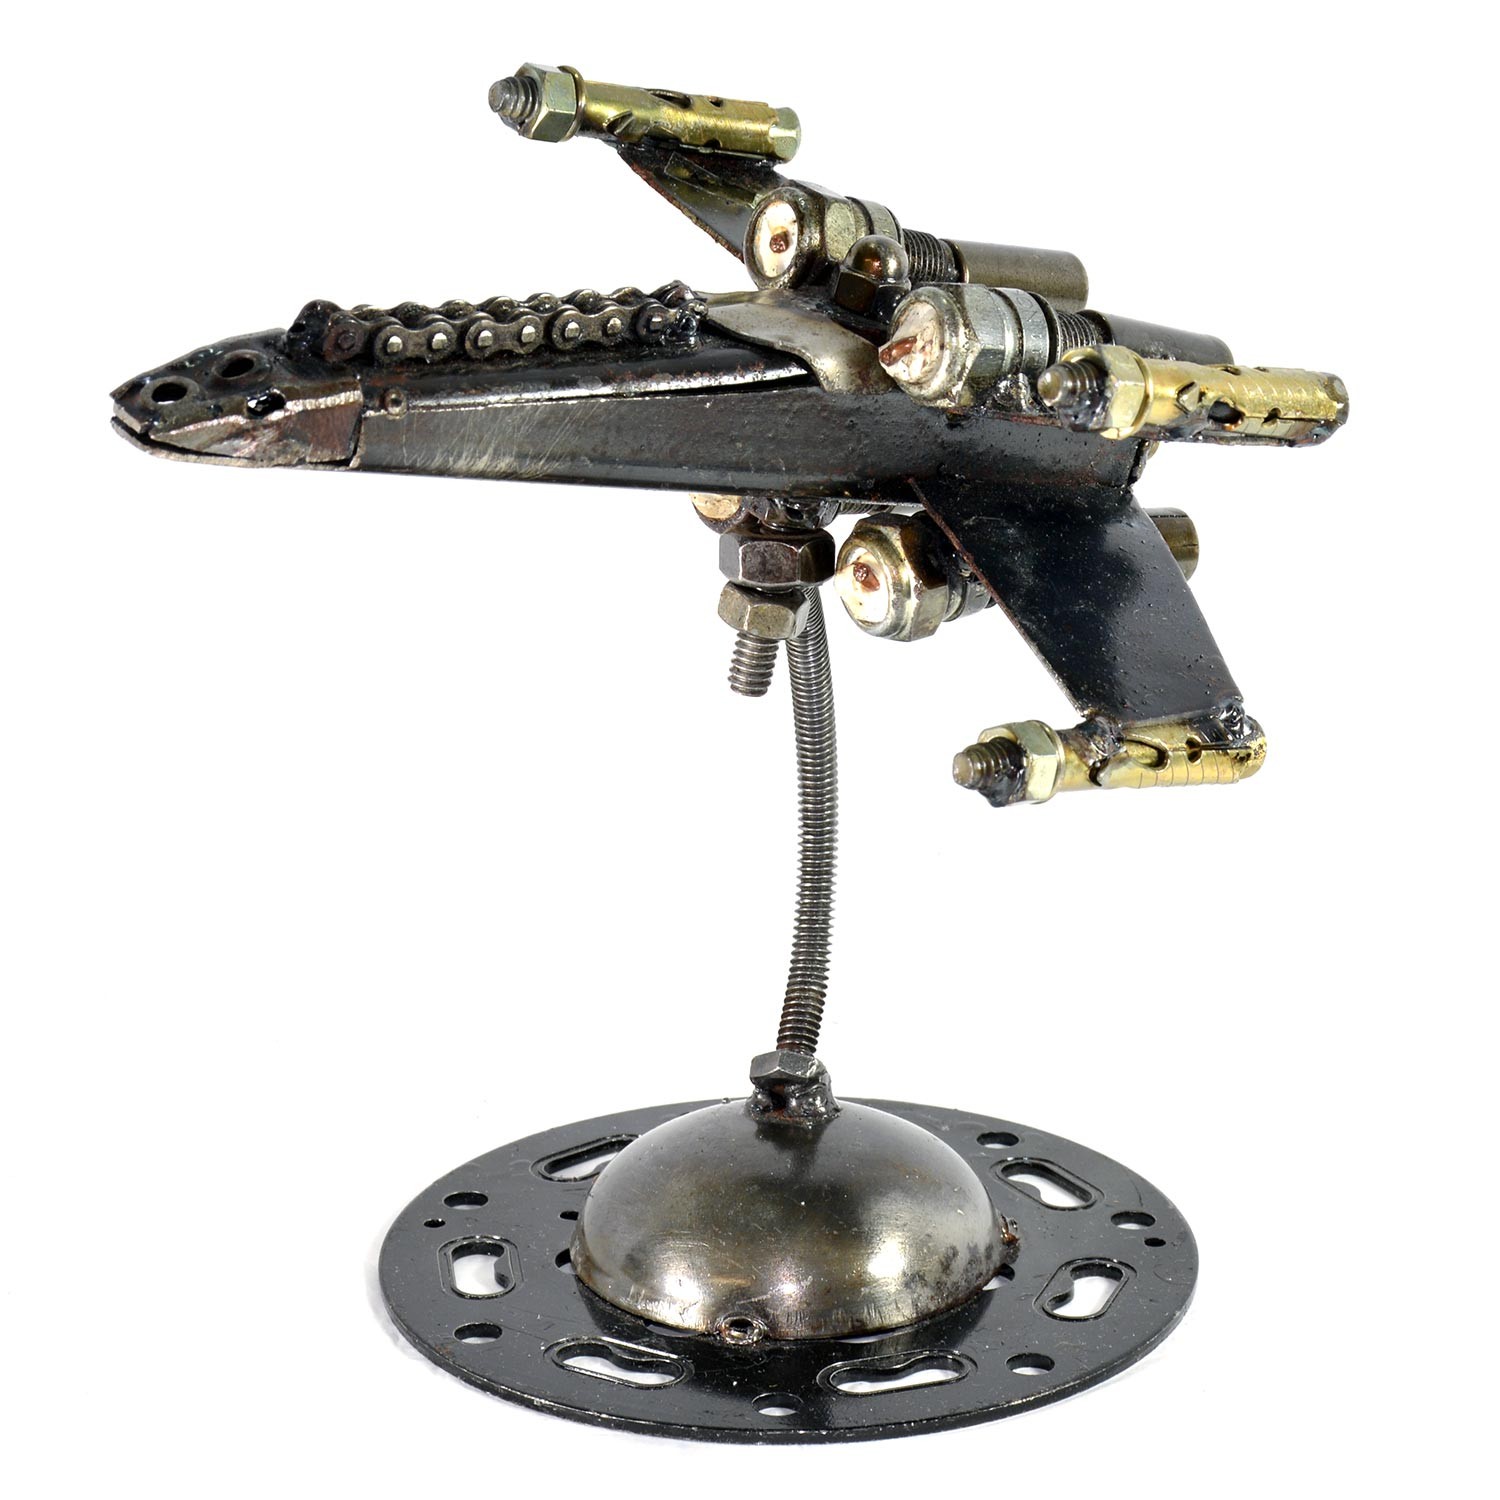 x wing statue